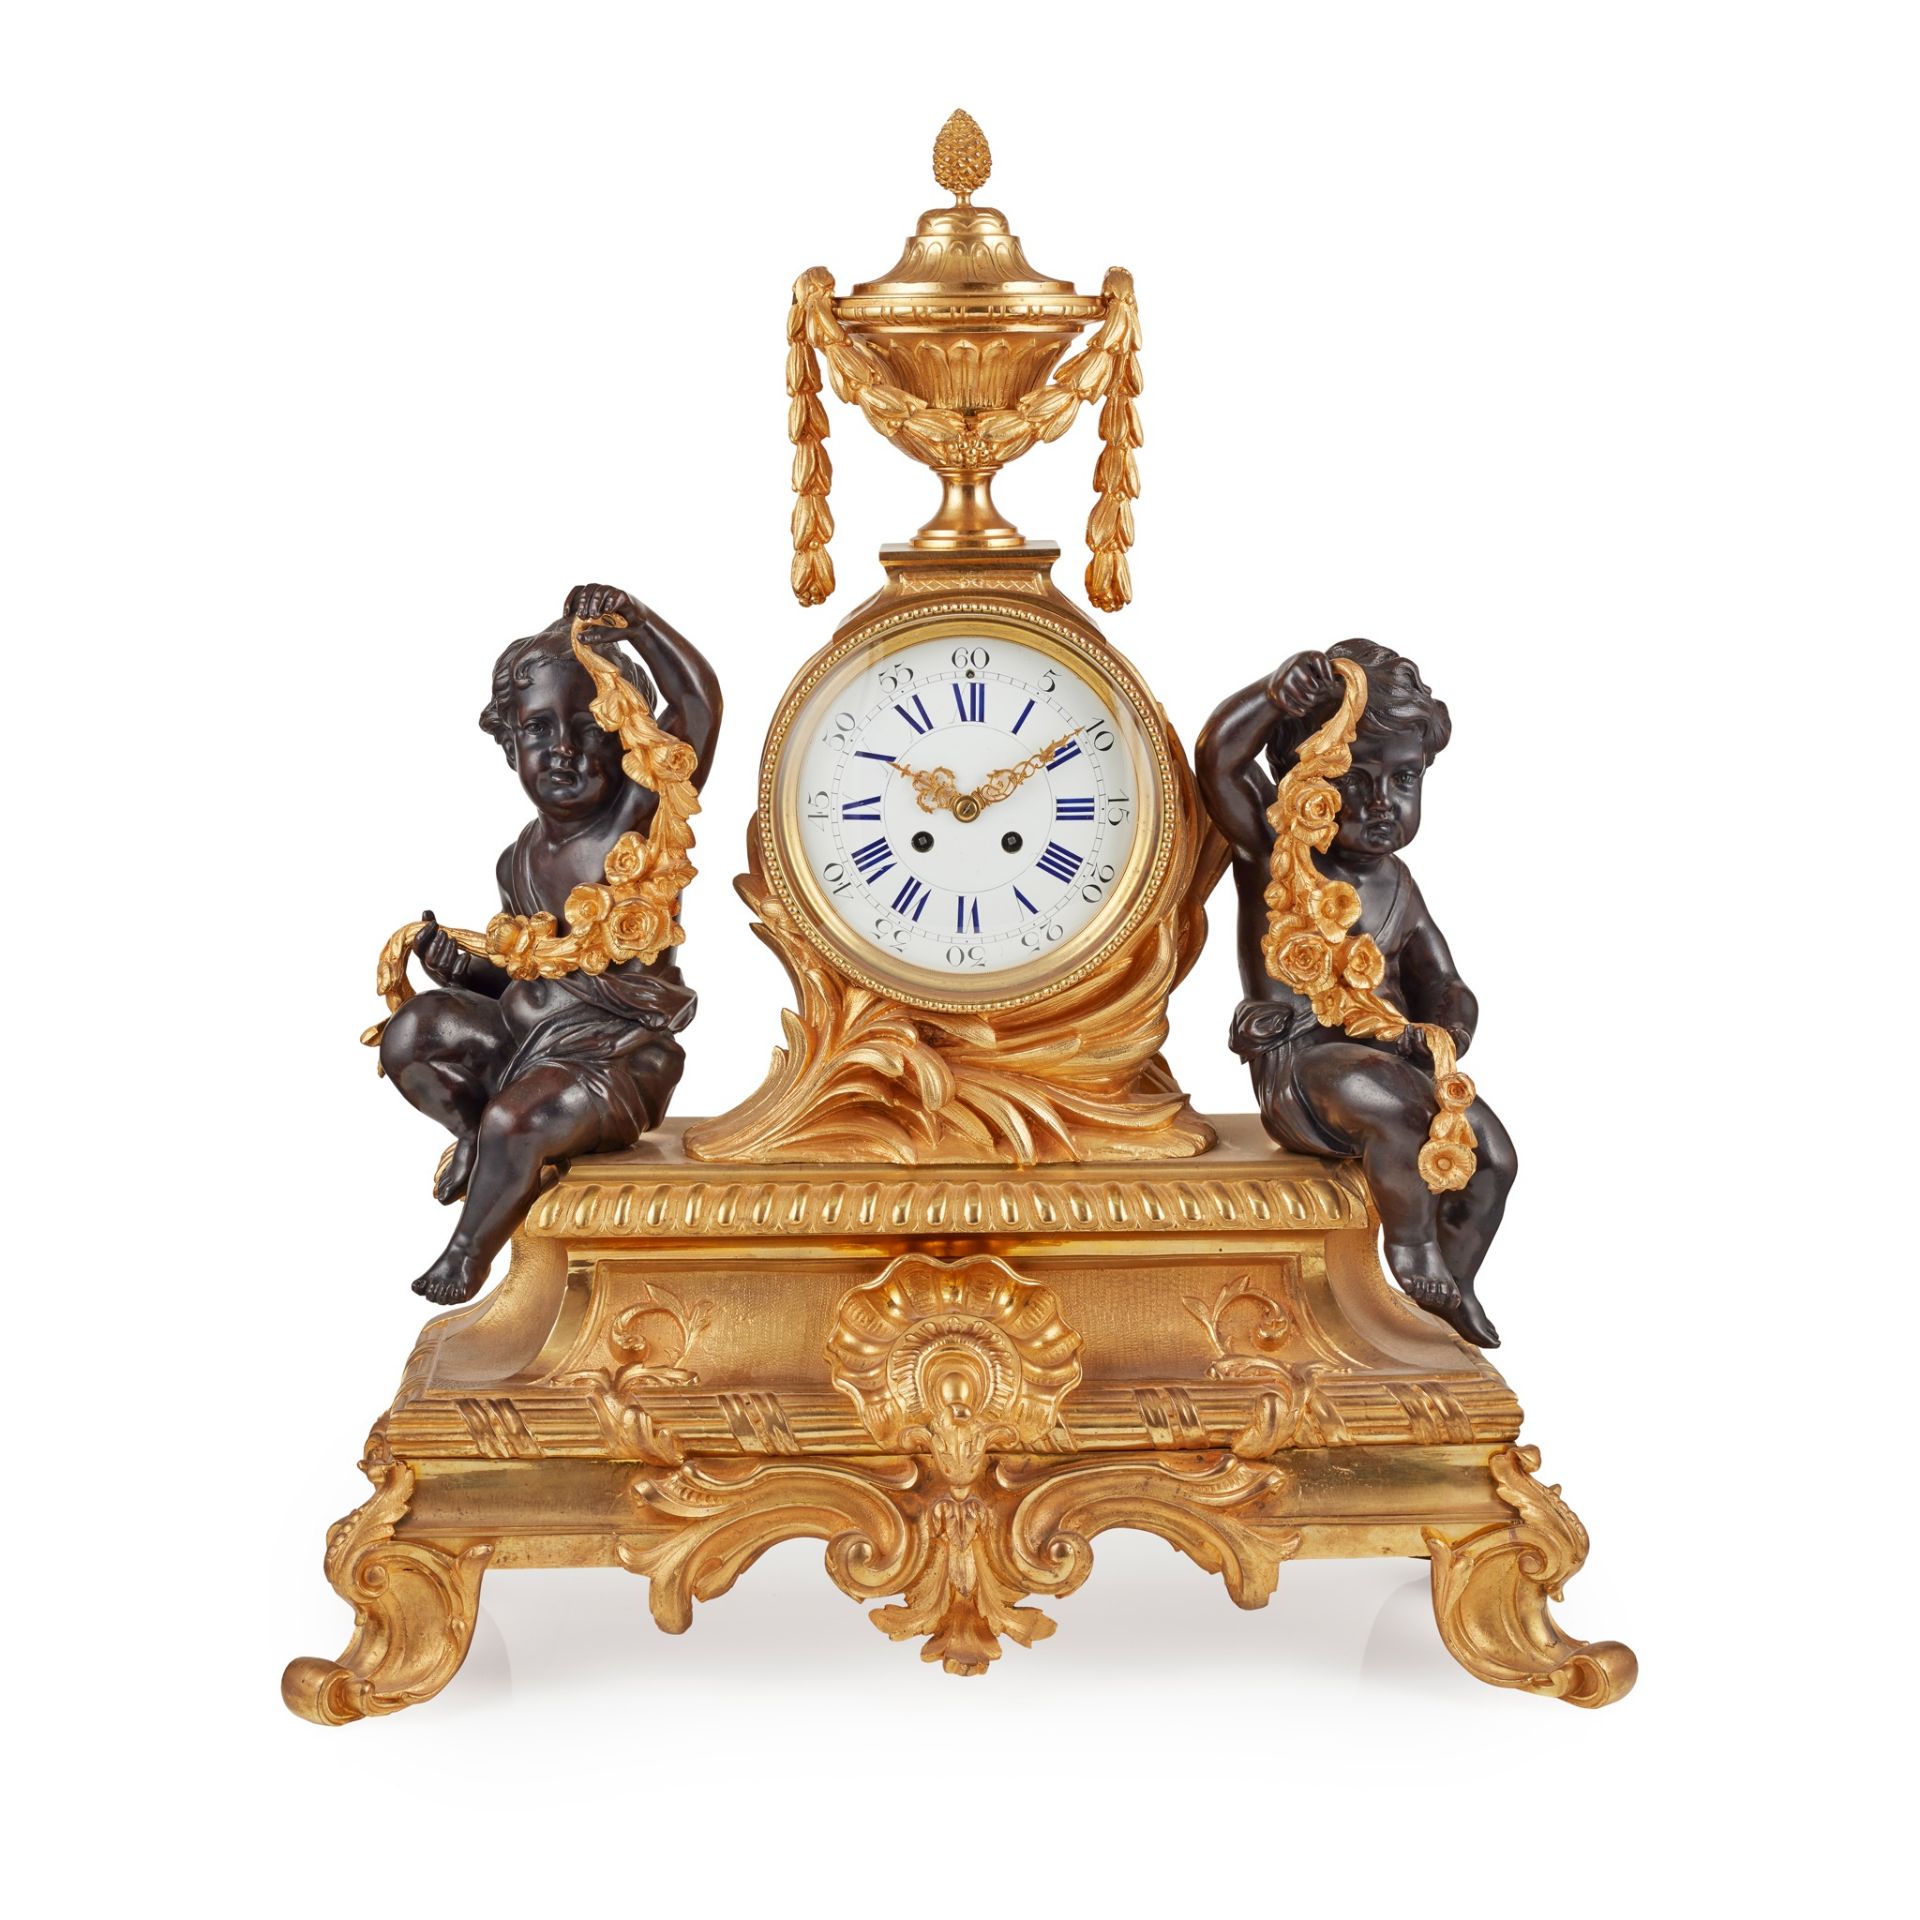 LARGE FRENCH GILT AND PATINATED BRONZE MANTEL CLOCK 19TH CENTURY